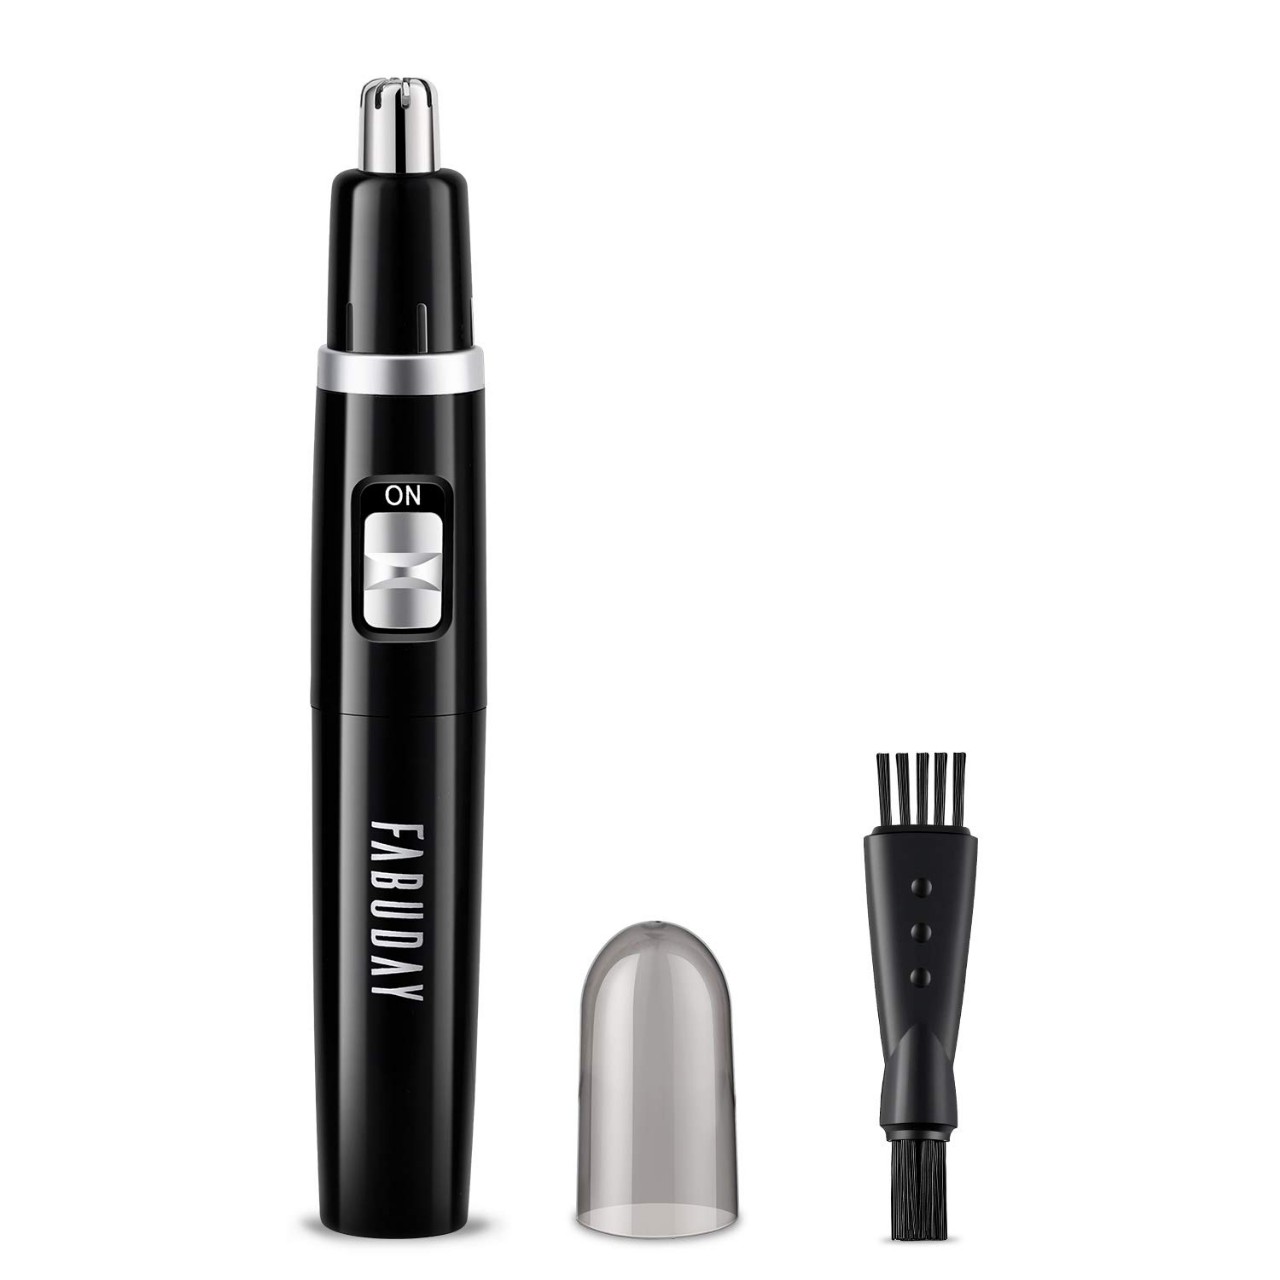 Fabuday Ear Nose Hair Trimmer, Professional Pain-Free Nose Trimmer for Men and Women, Nostril Trimme